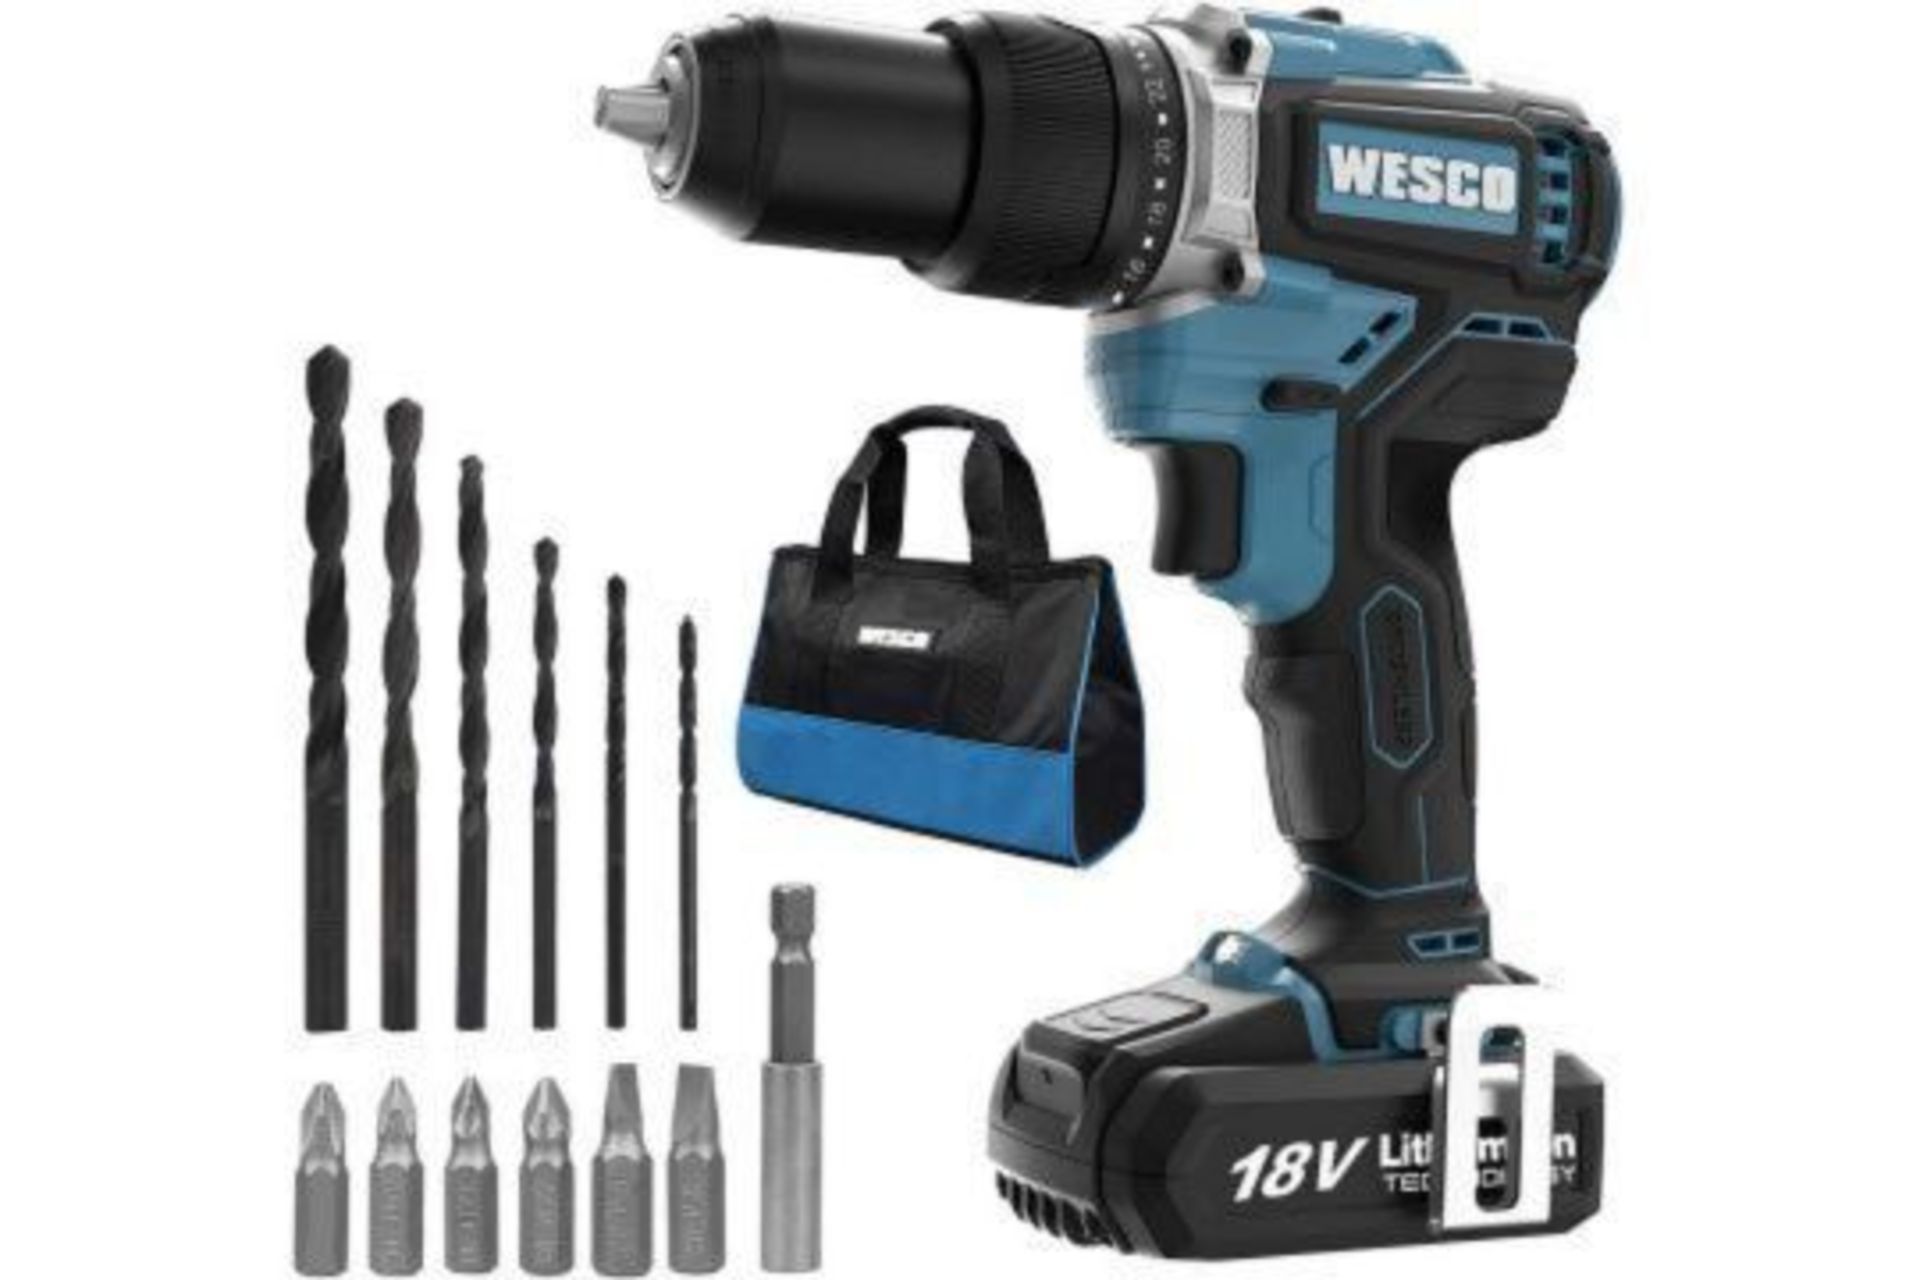 PALLET TO CONTAIN 24 X NEW BOXED WESCO Brushless Cordless Drill, WESCO 18V 2.0Ah Cordless Combi